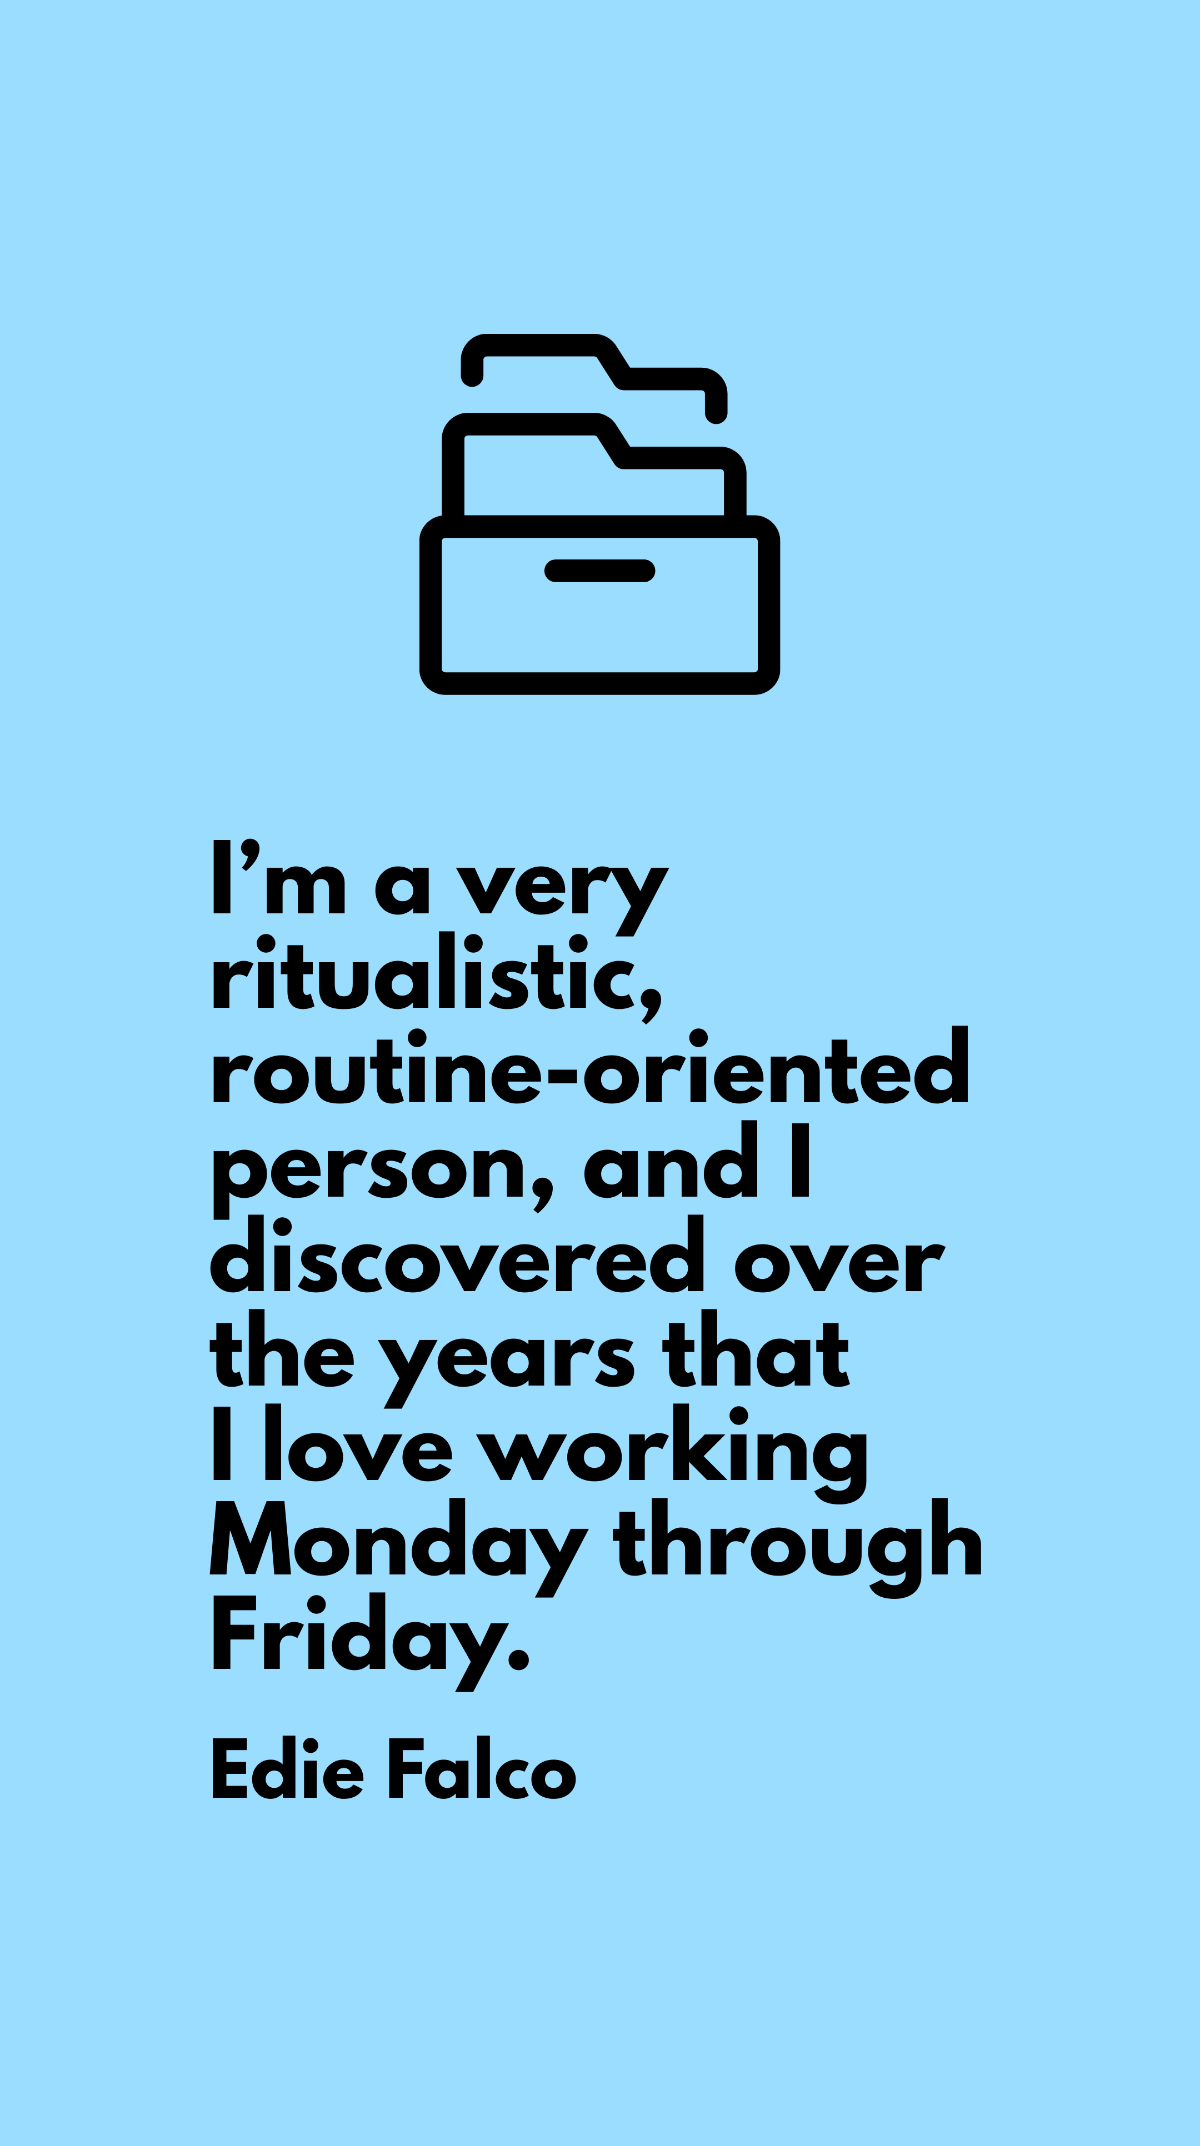 Edie Falco - I’m a very ritualistic, routine-oriented person, and I discovered over the years that I love working Monday through Friday.  Template